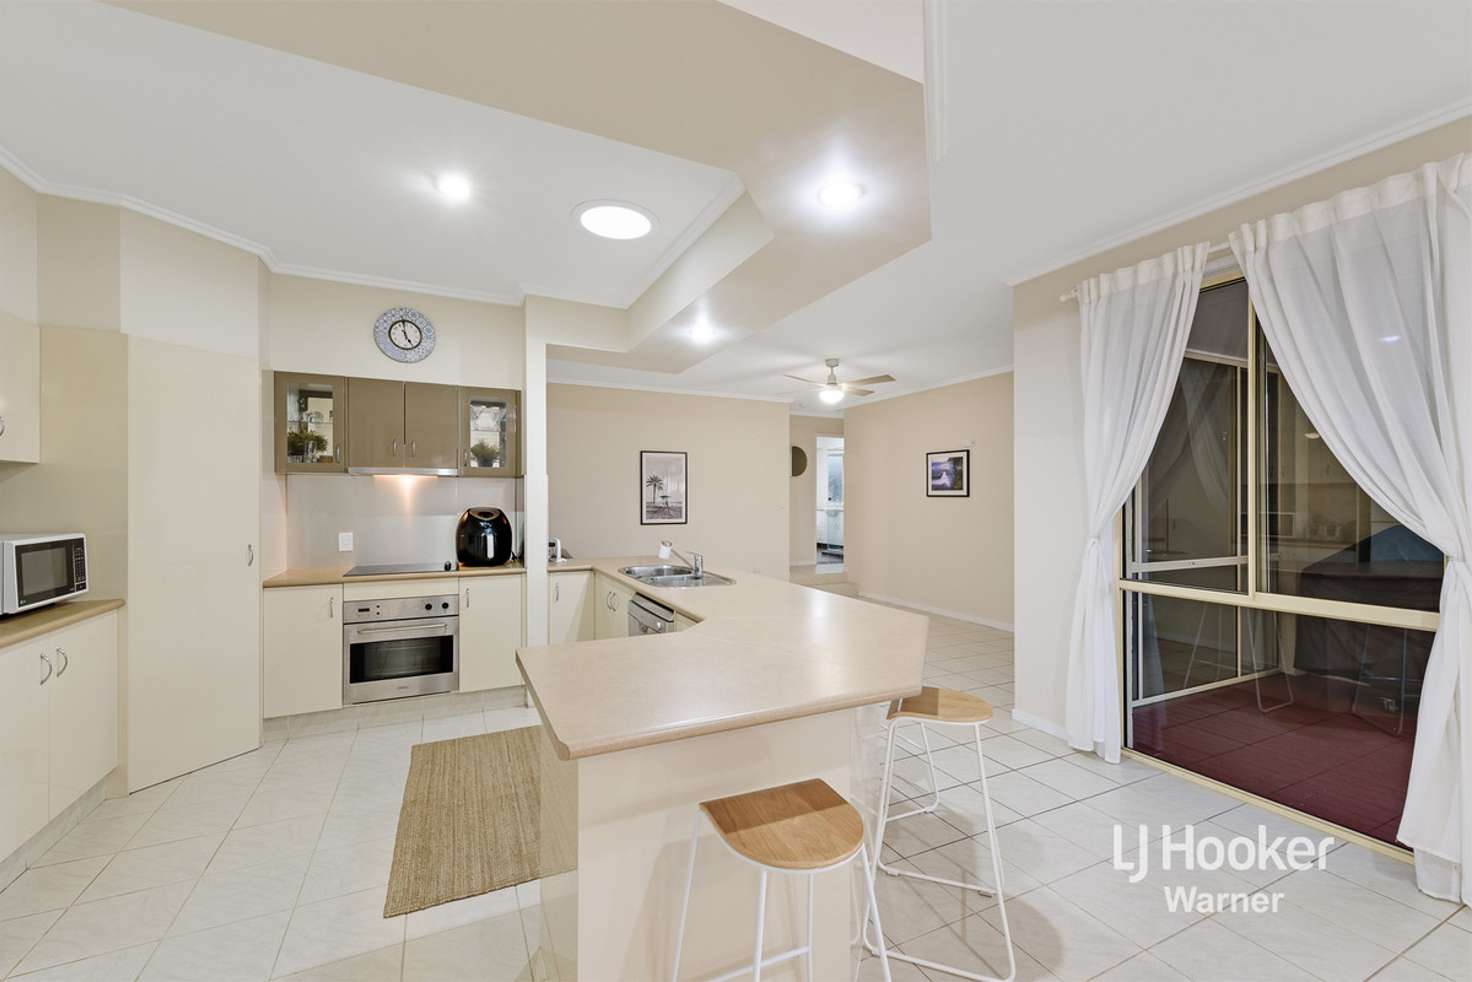 Main view of Homely house listing, 28 Everest Street, Warner QLD 4500